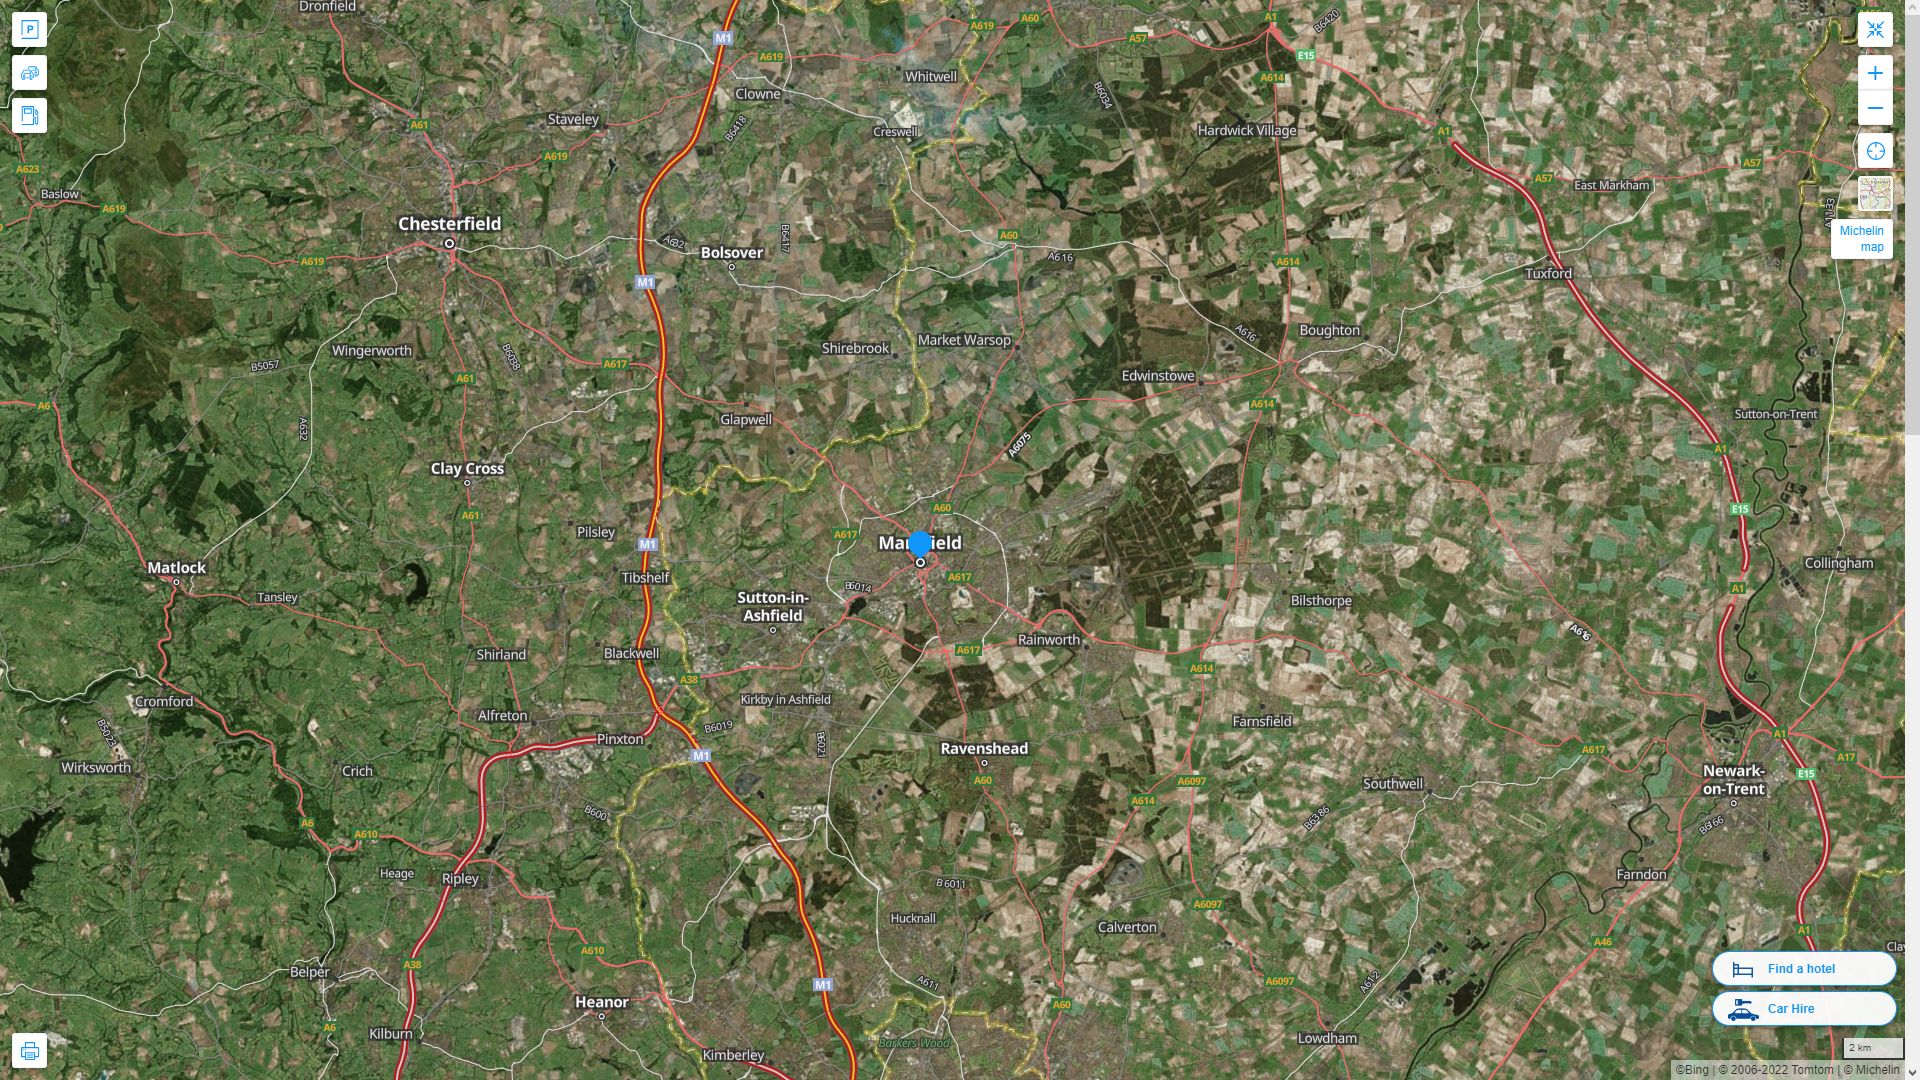 Mansfield Highway and Road Map with Satellite View